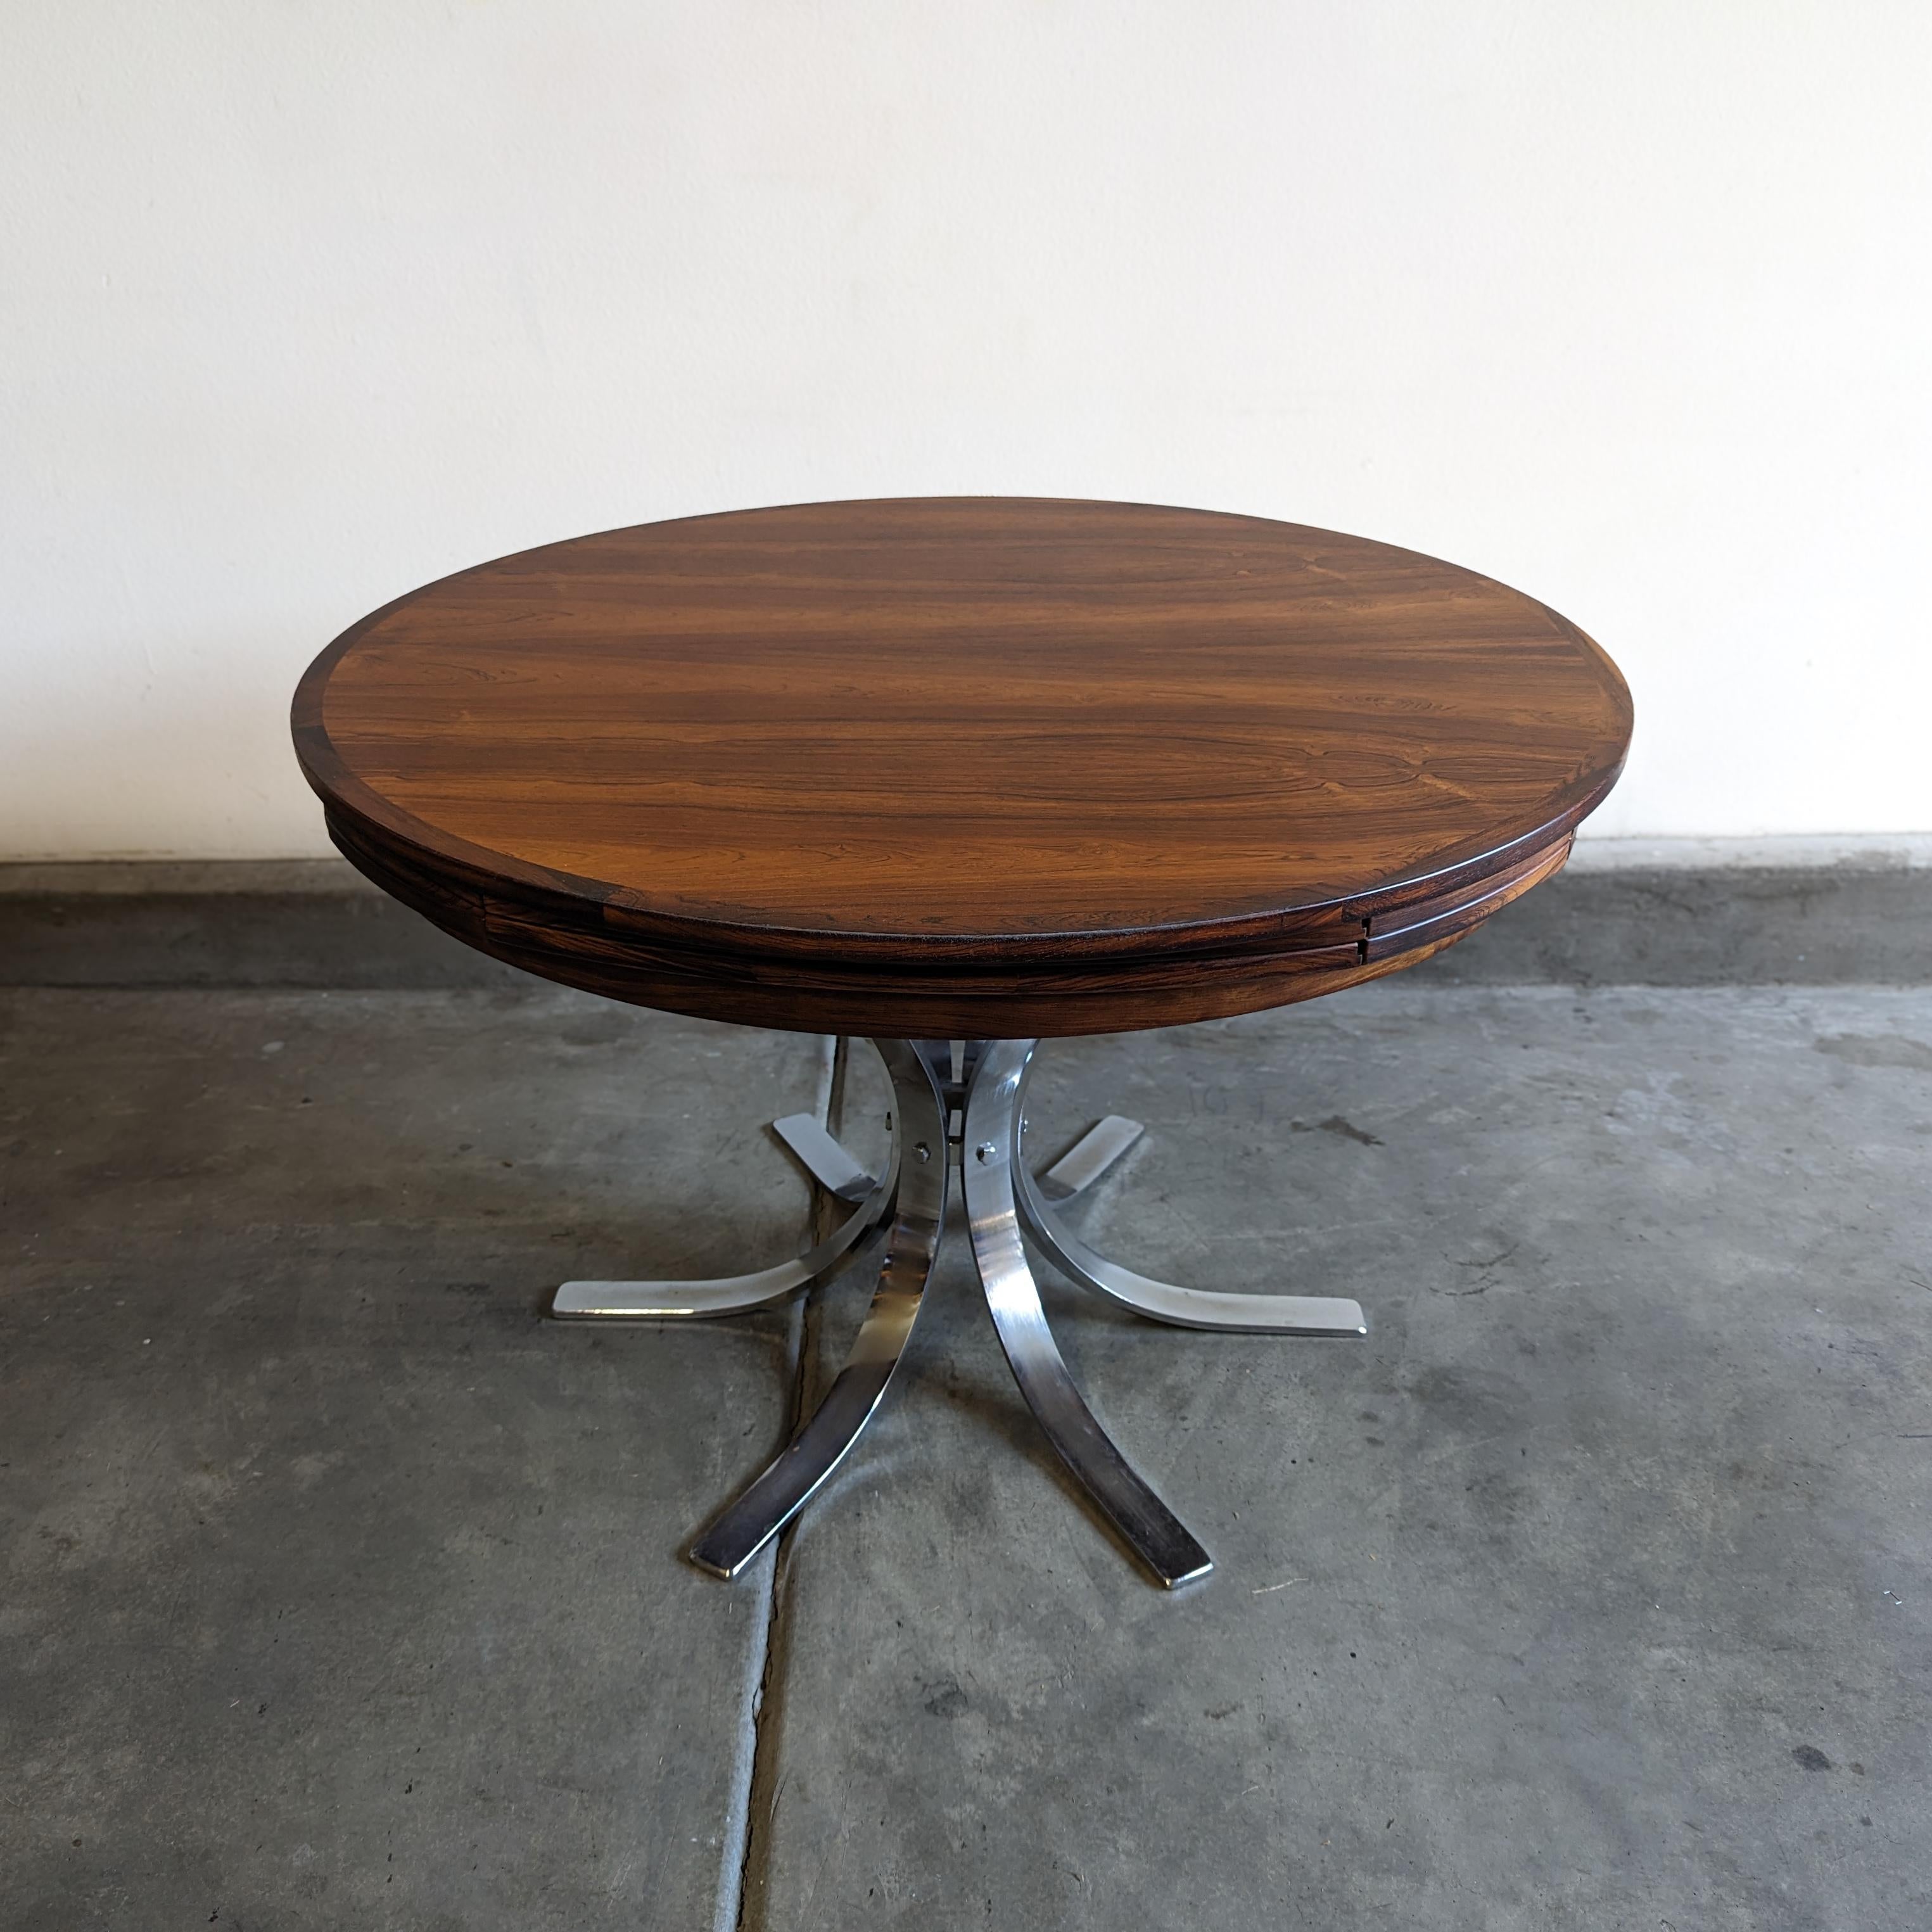 Danish Mid Century Rosewood Flip Flap Circular Dining Table by Dyrlund, c1960s For Sale 8